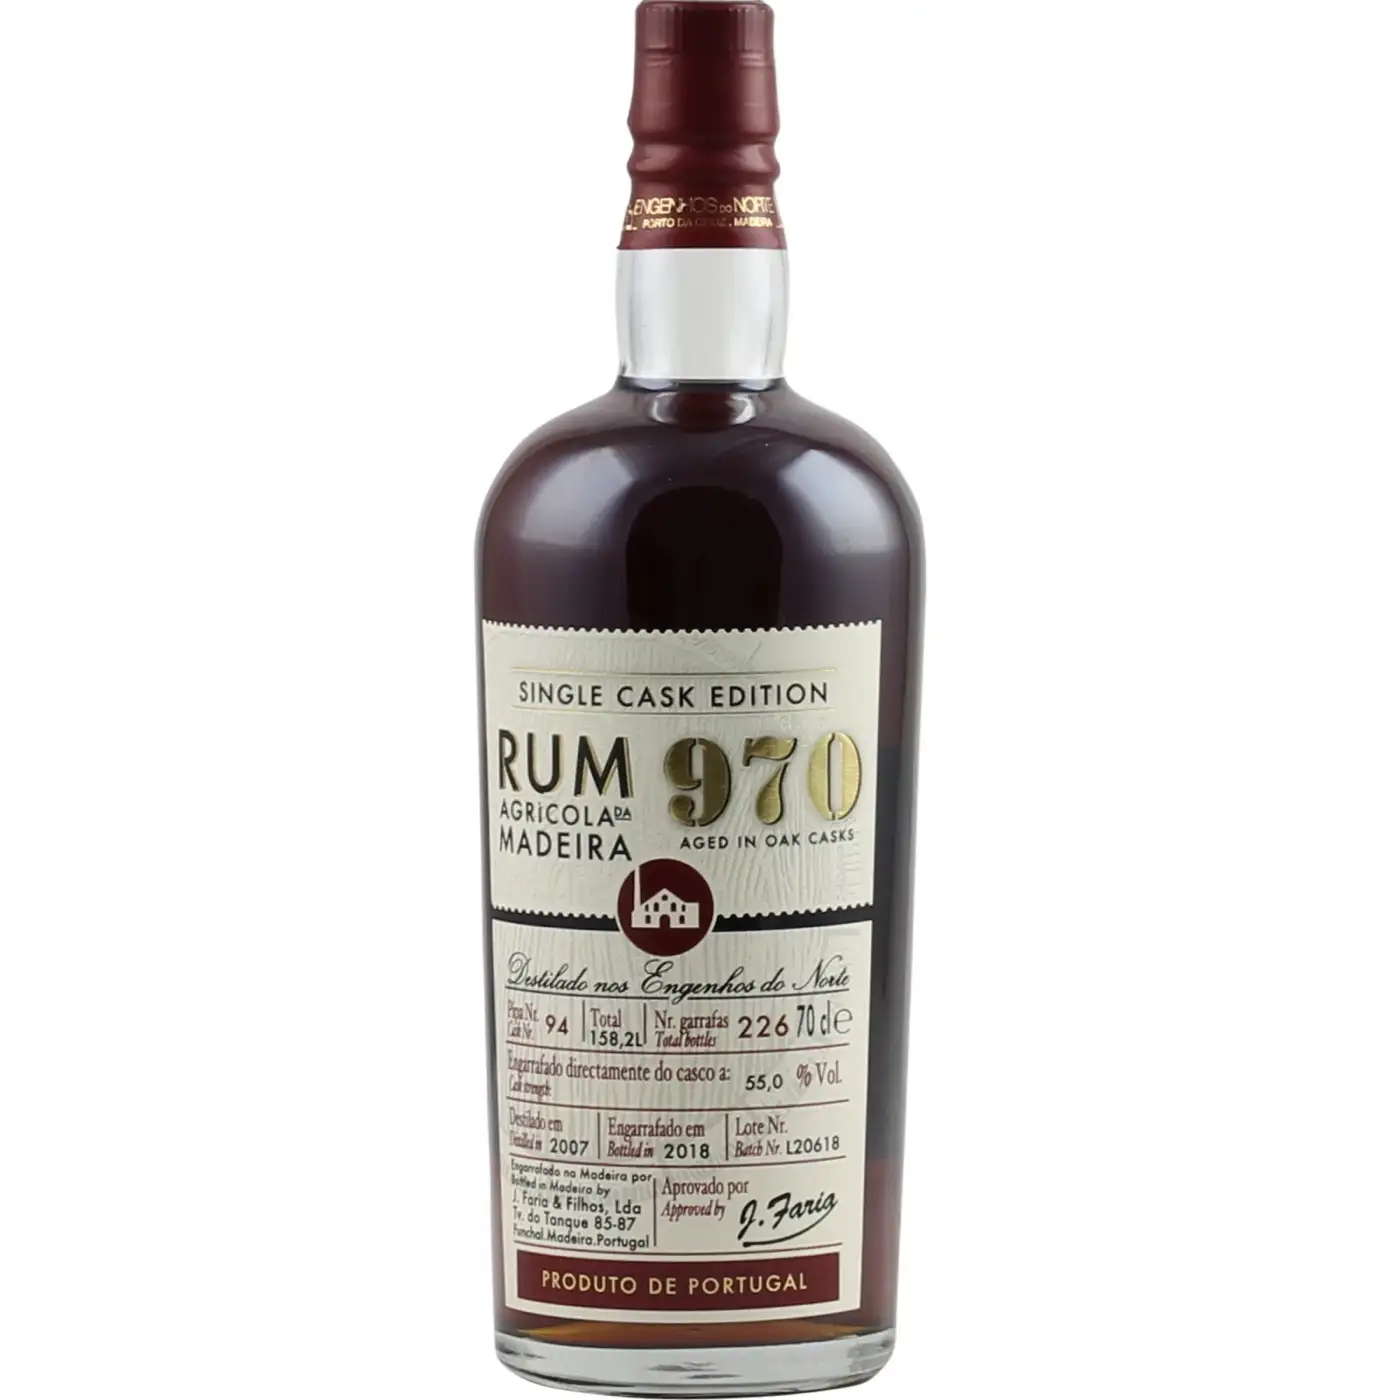 Image of the front of the bottle of the rum 970 Single Cask Edition